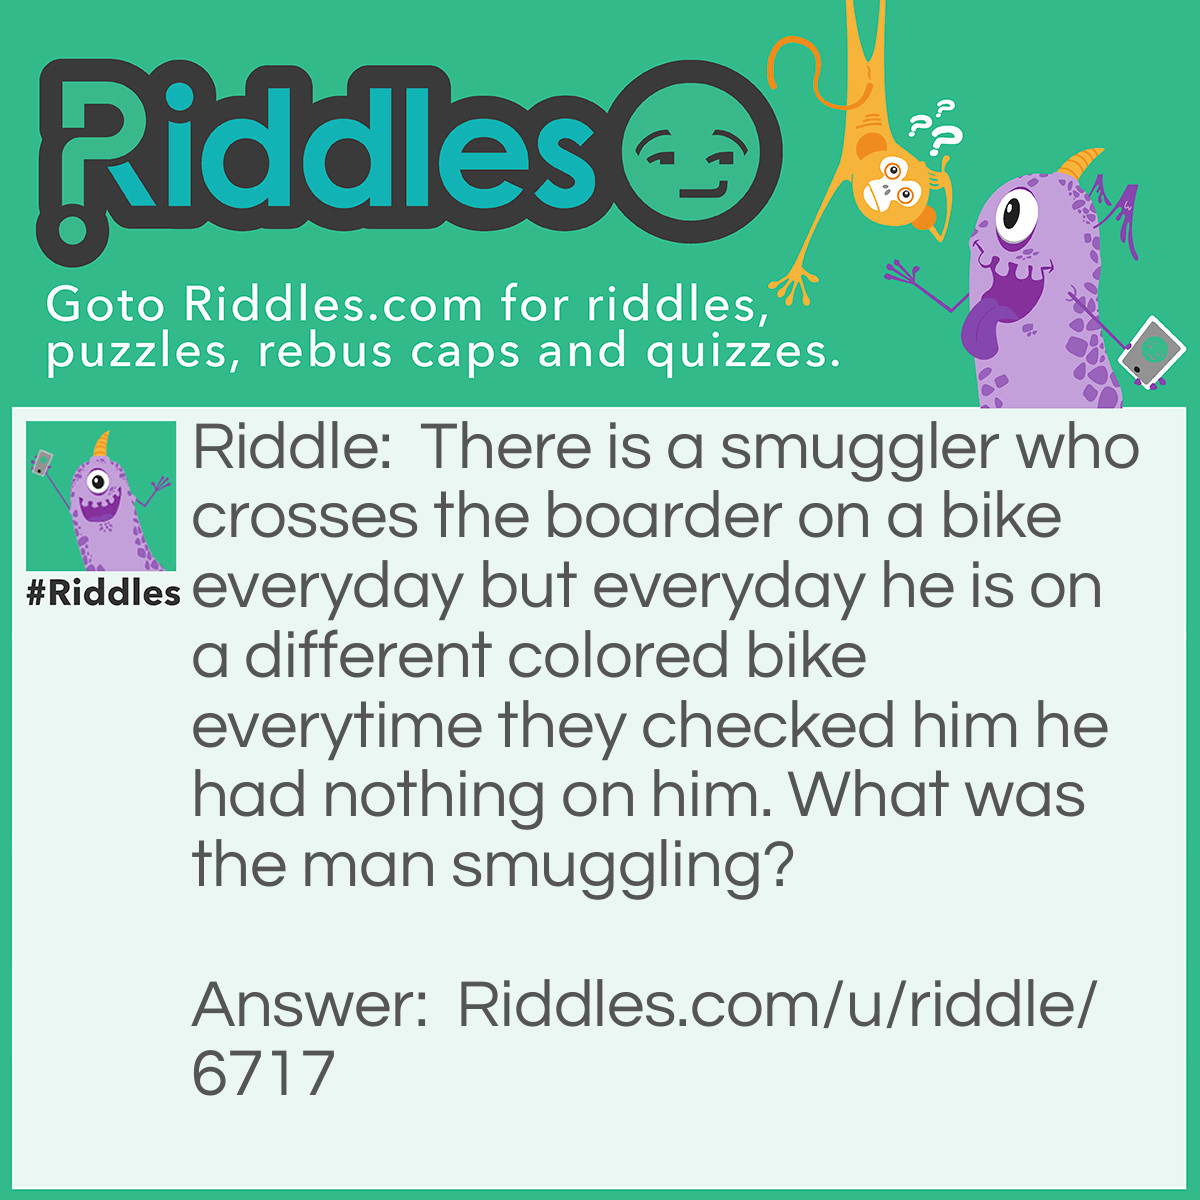 Riddle: There is a smuggler who crosses the boarder on a bike everyday but everyday he is on a different colored bike everytime they checked him he had nothing on him. What was the man smuggling? Answer: Everyday the man would steal different colored bikes that he road on that is what he stole everyday!